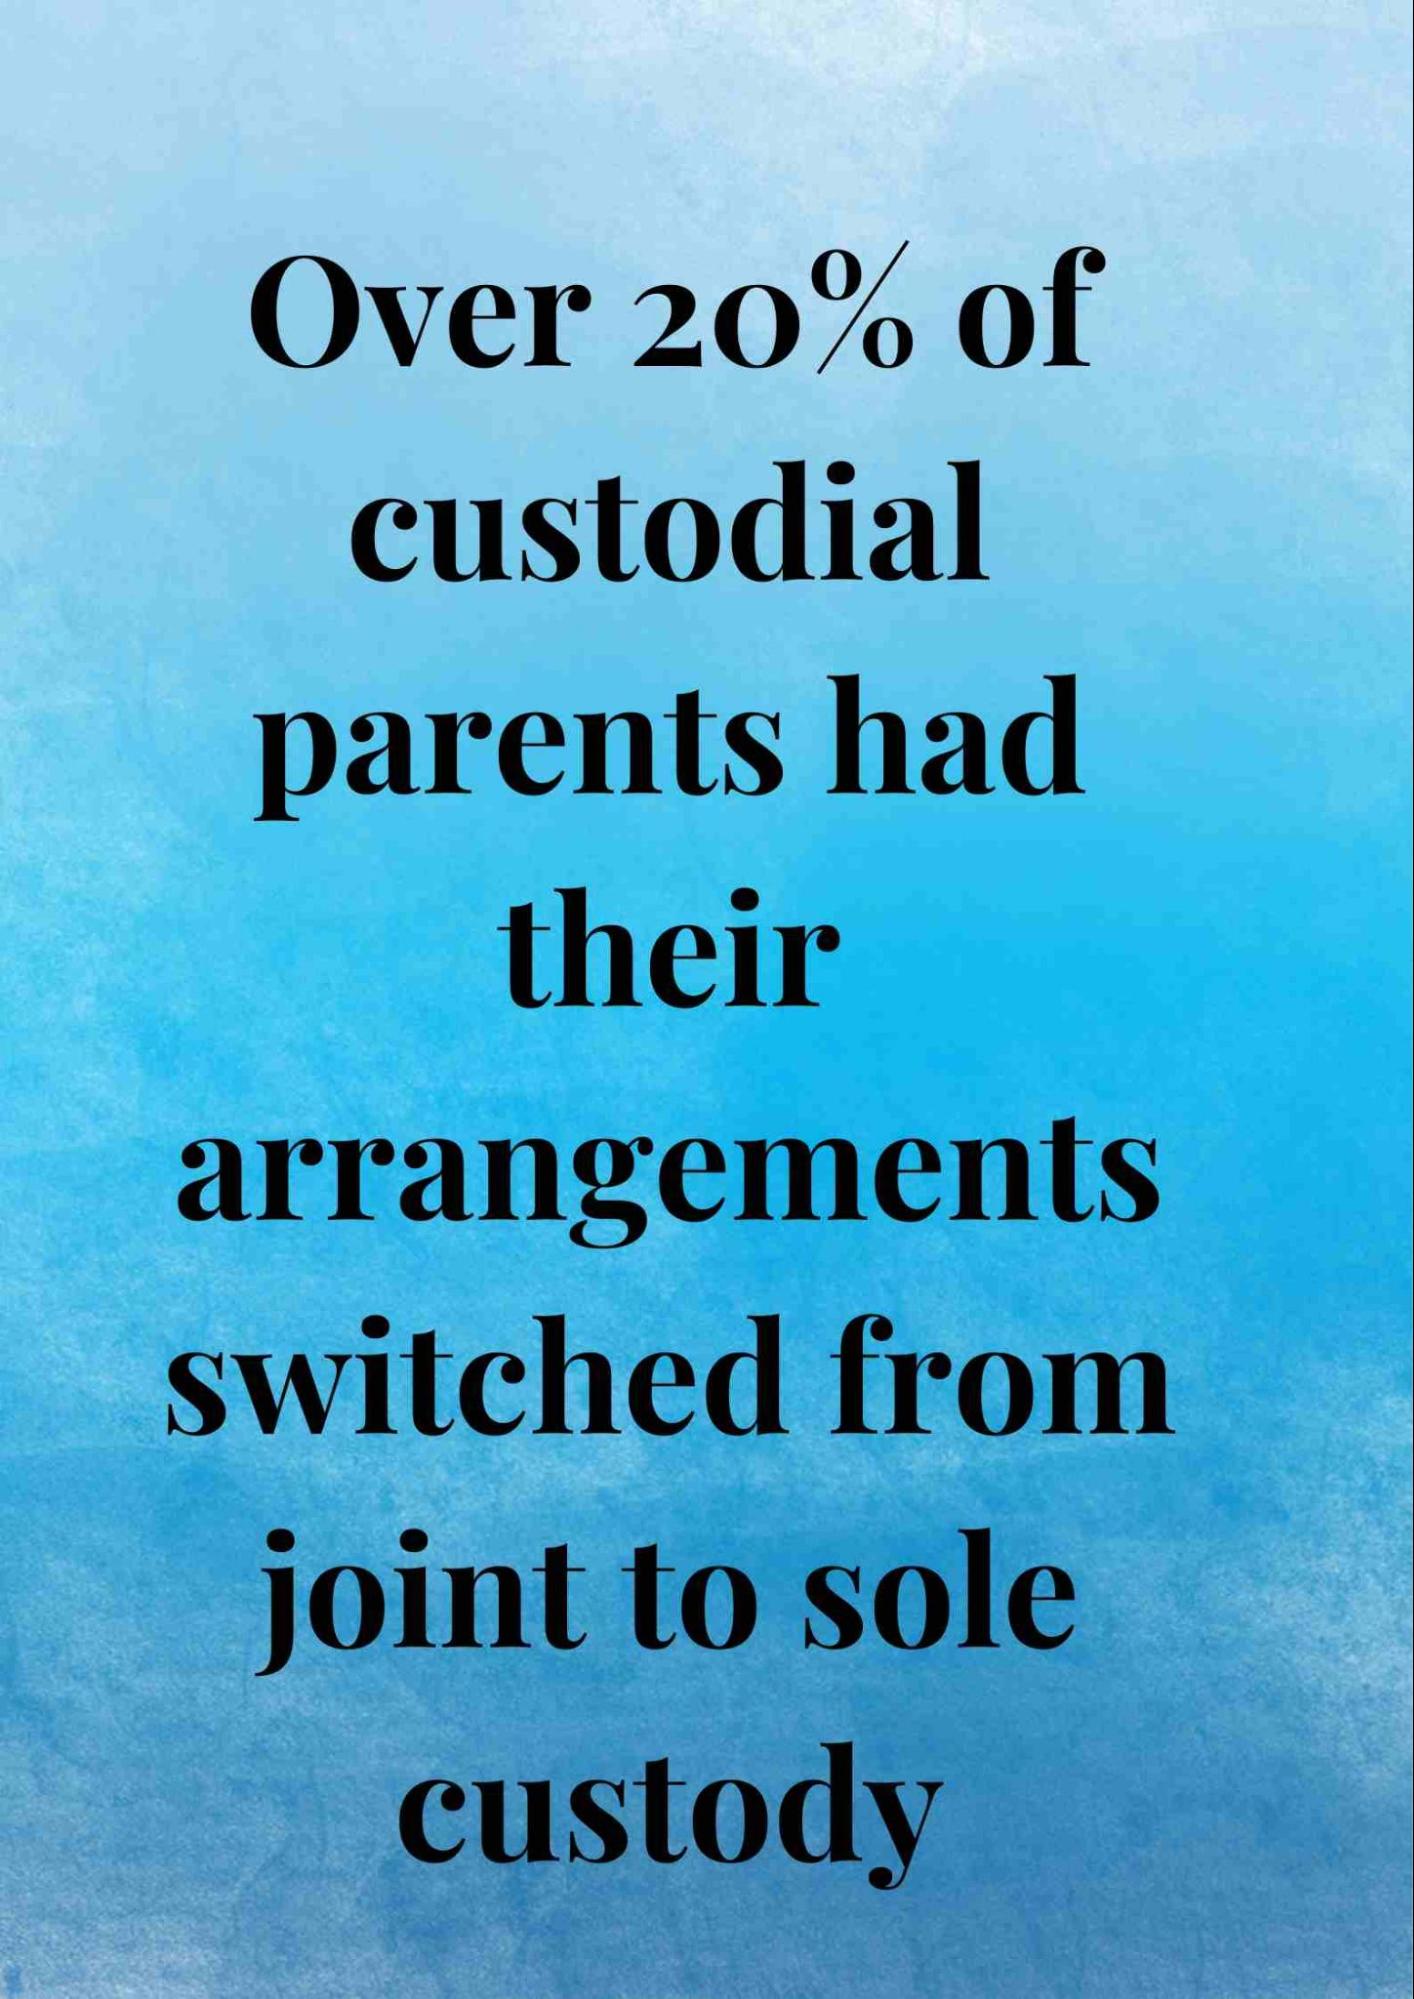 Over 20% of custodial parents had their arrangements switched to sole custody.